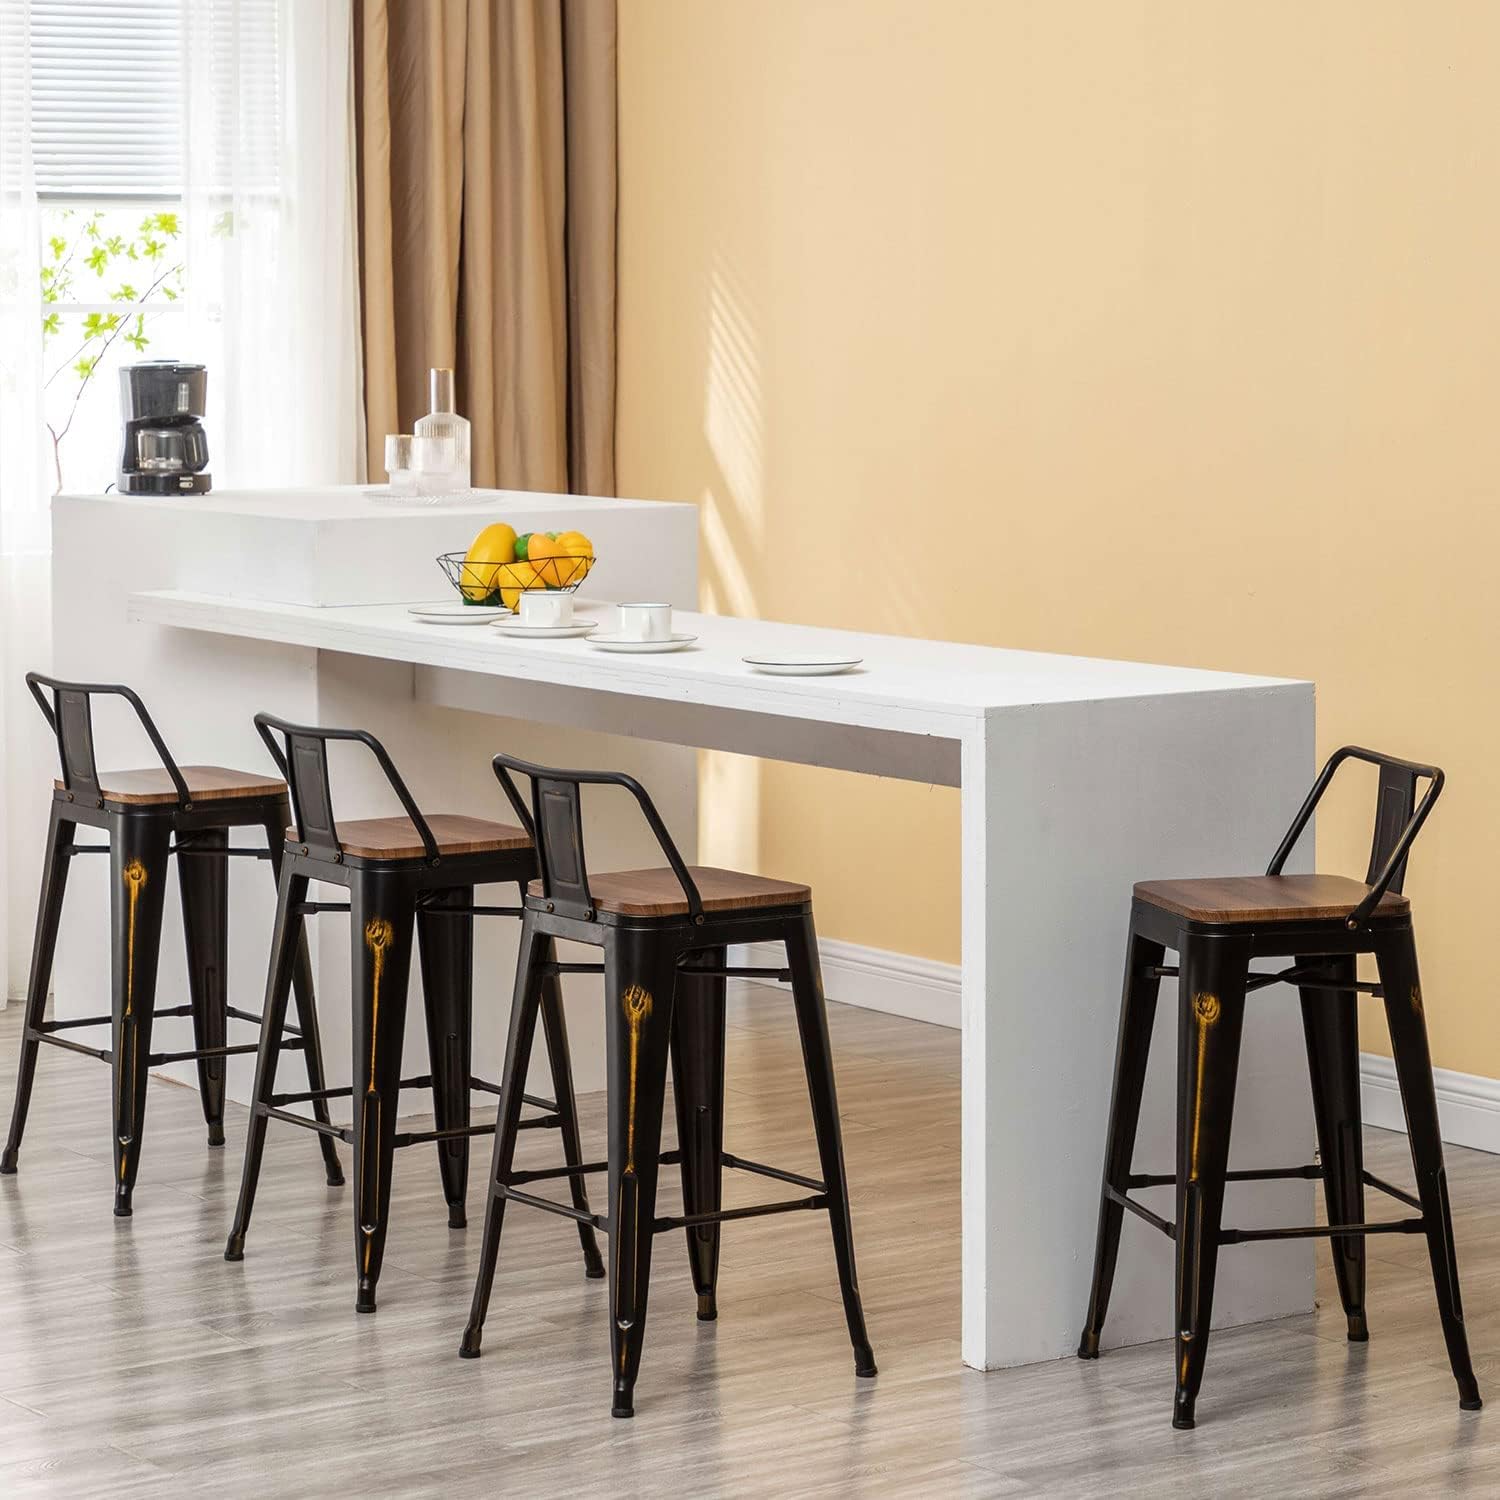 Andeworld Bar Stools Set of 4 Counter Height Stools Industrial Metal - $95